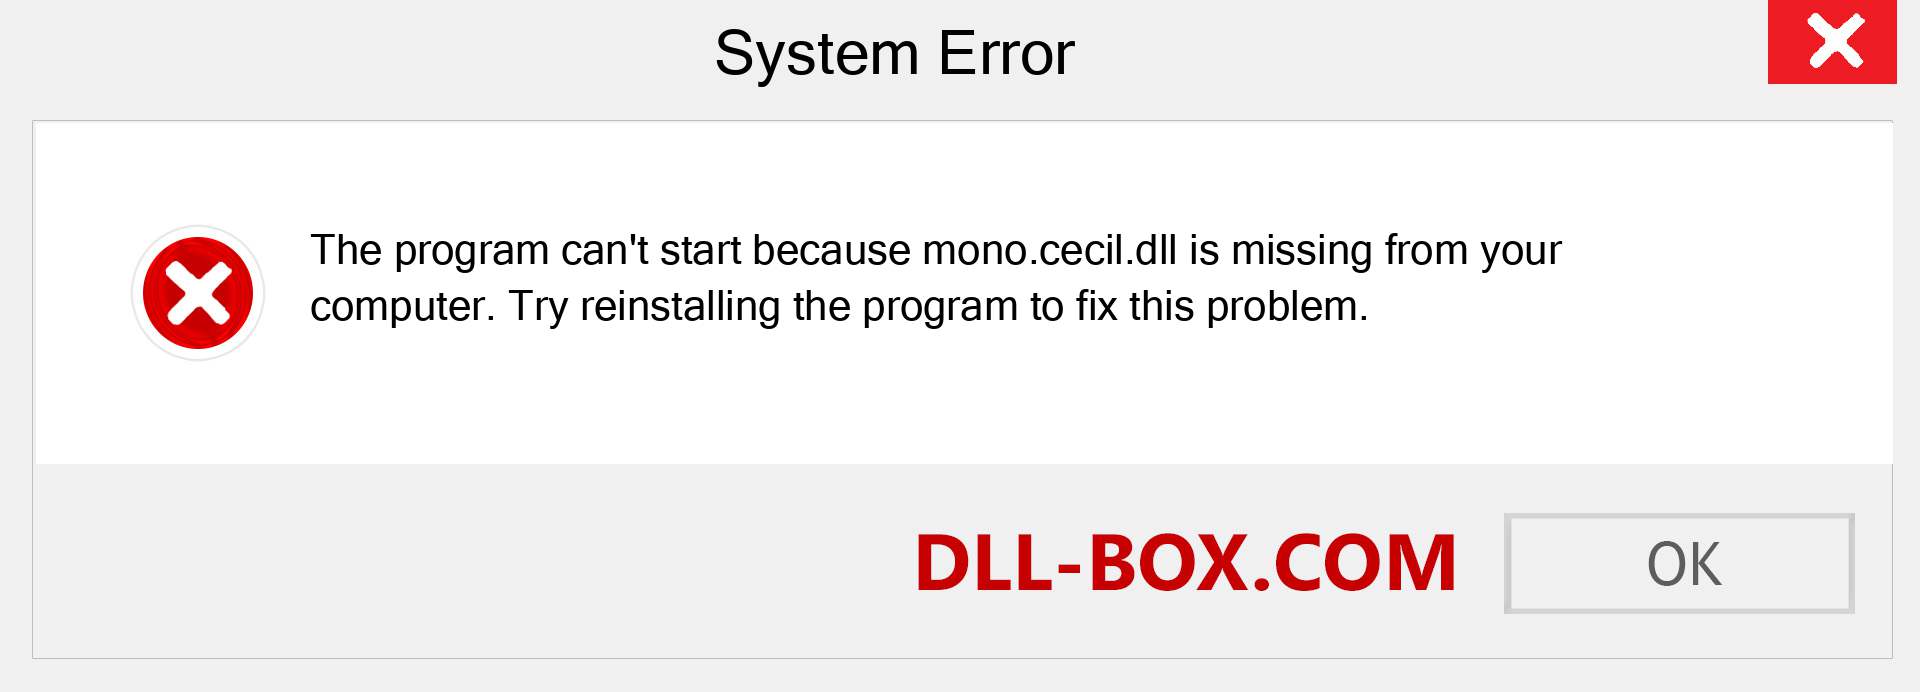  mono.cecil.dll file is missing?. Download for Windows 7, 8, 10 - Fix  mono.cecil dll Missing Error on Windows, photos, images